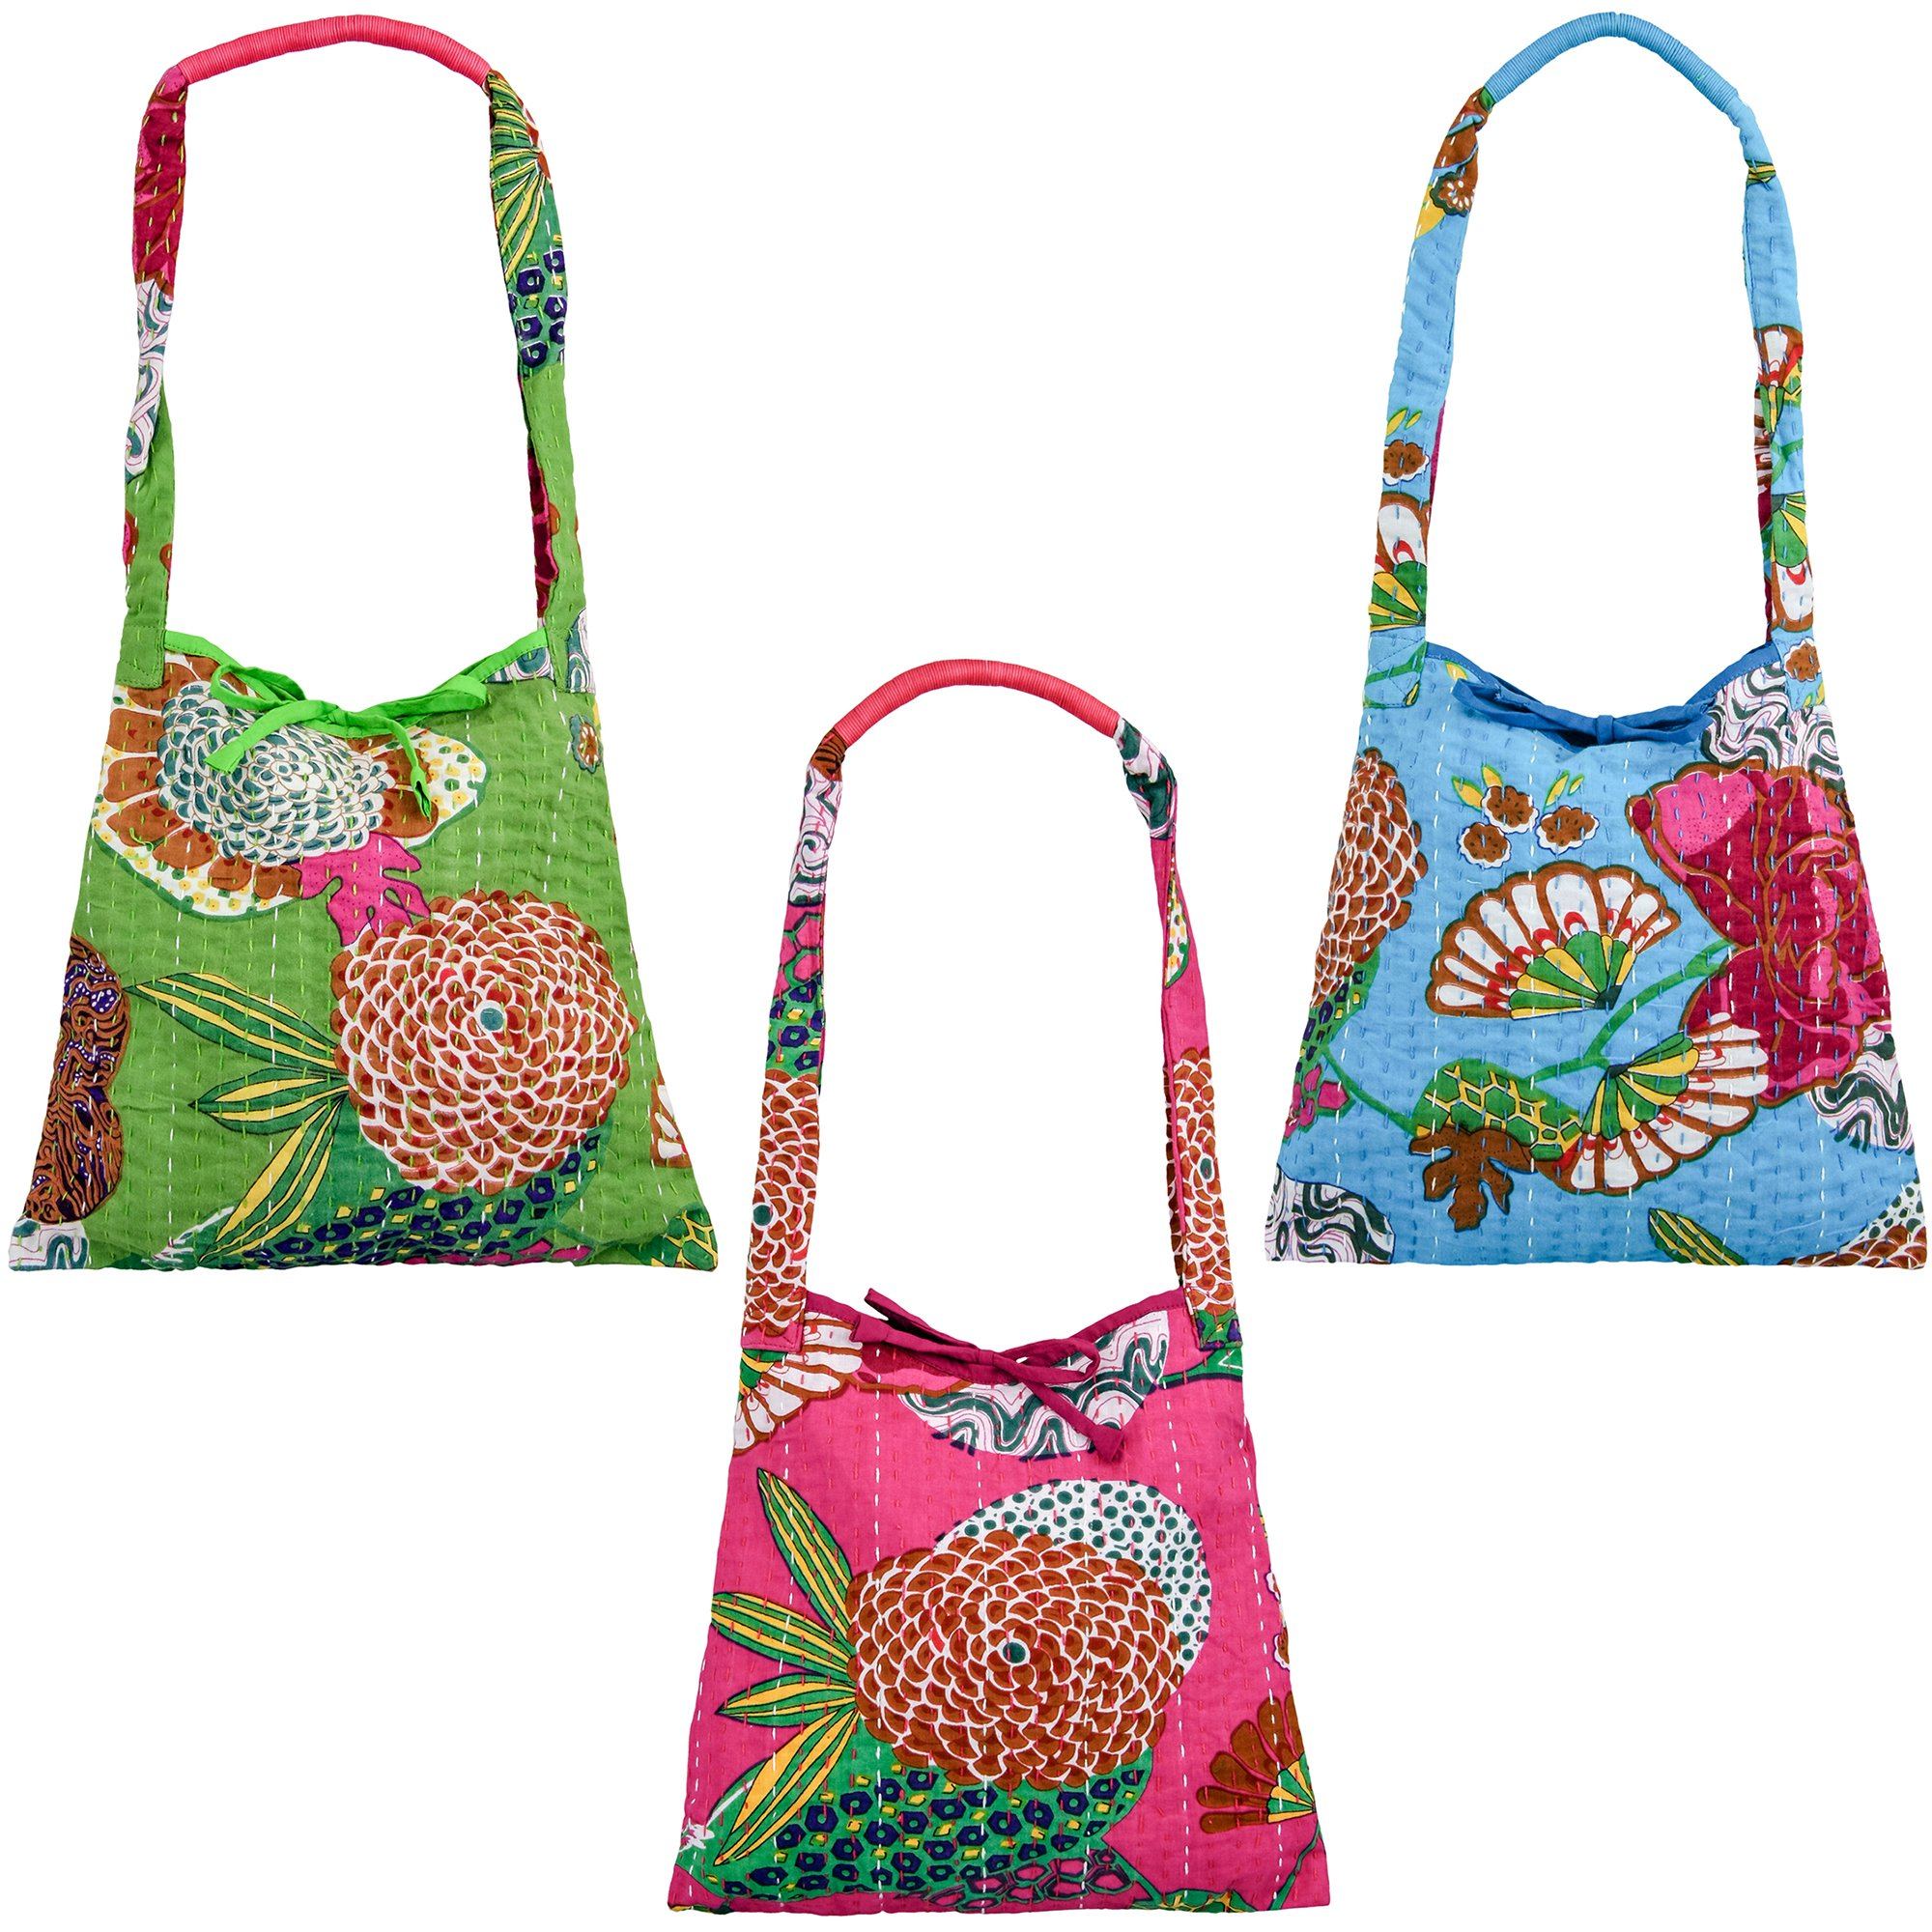 Bright Hand Stitched Kantha Hobo Bag - Lime